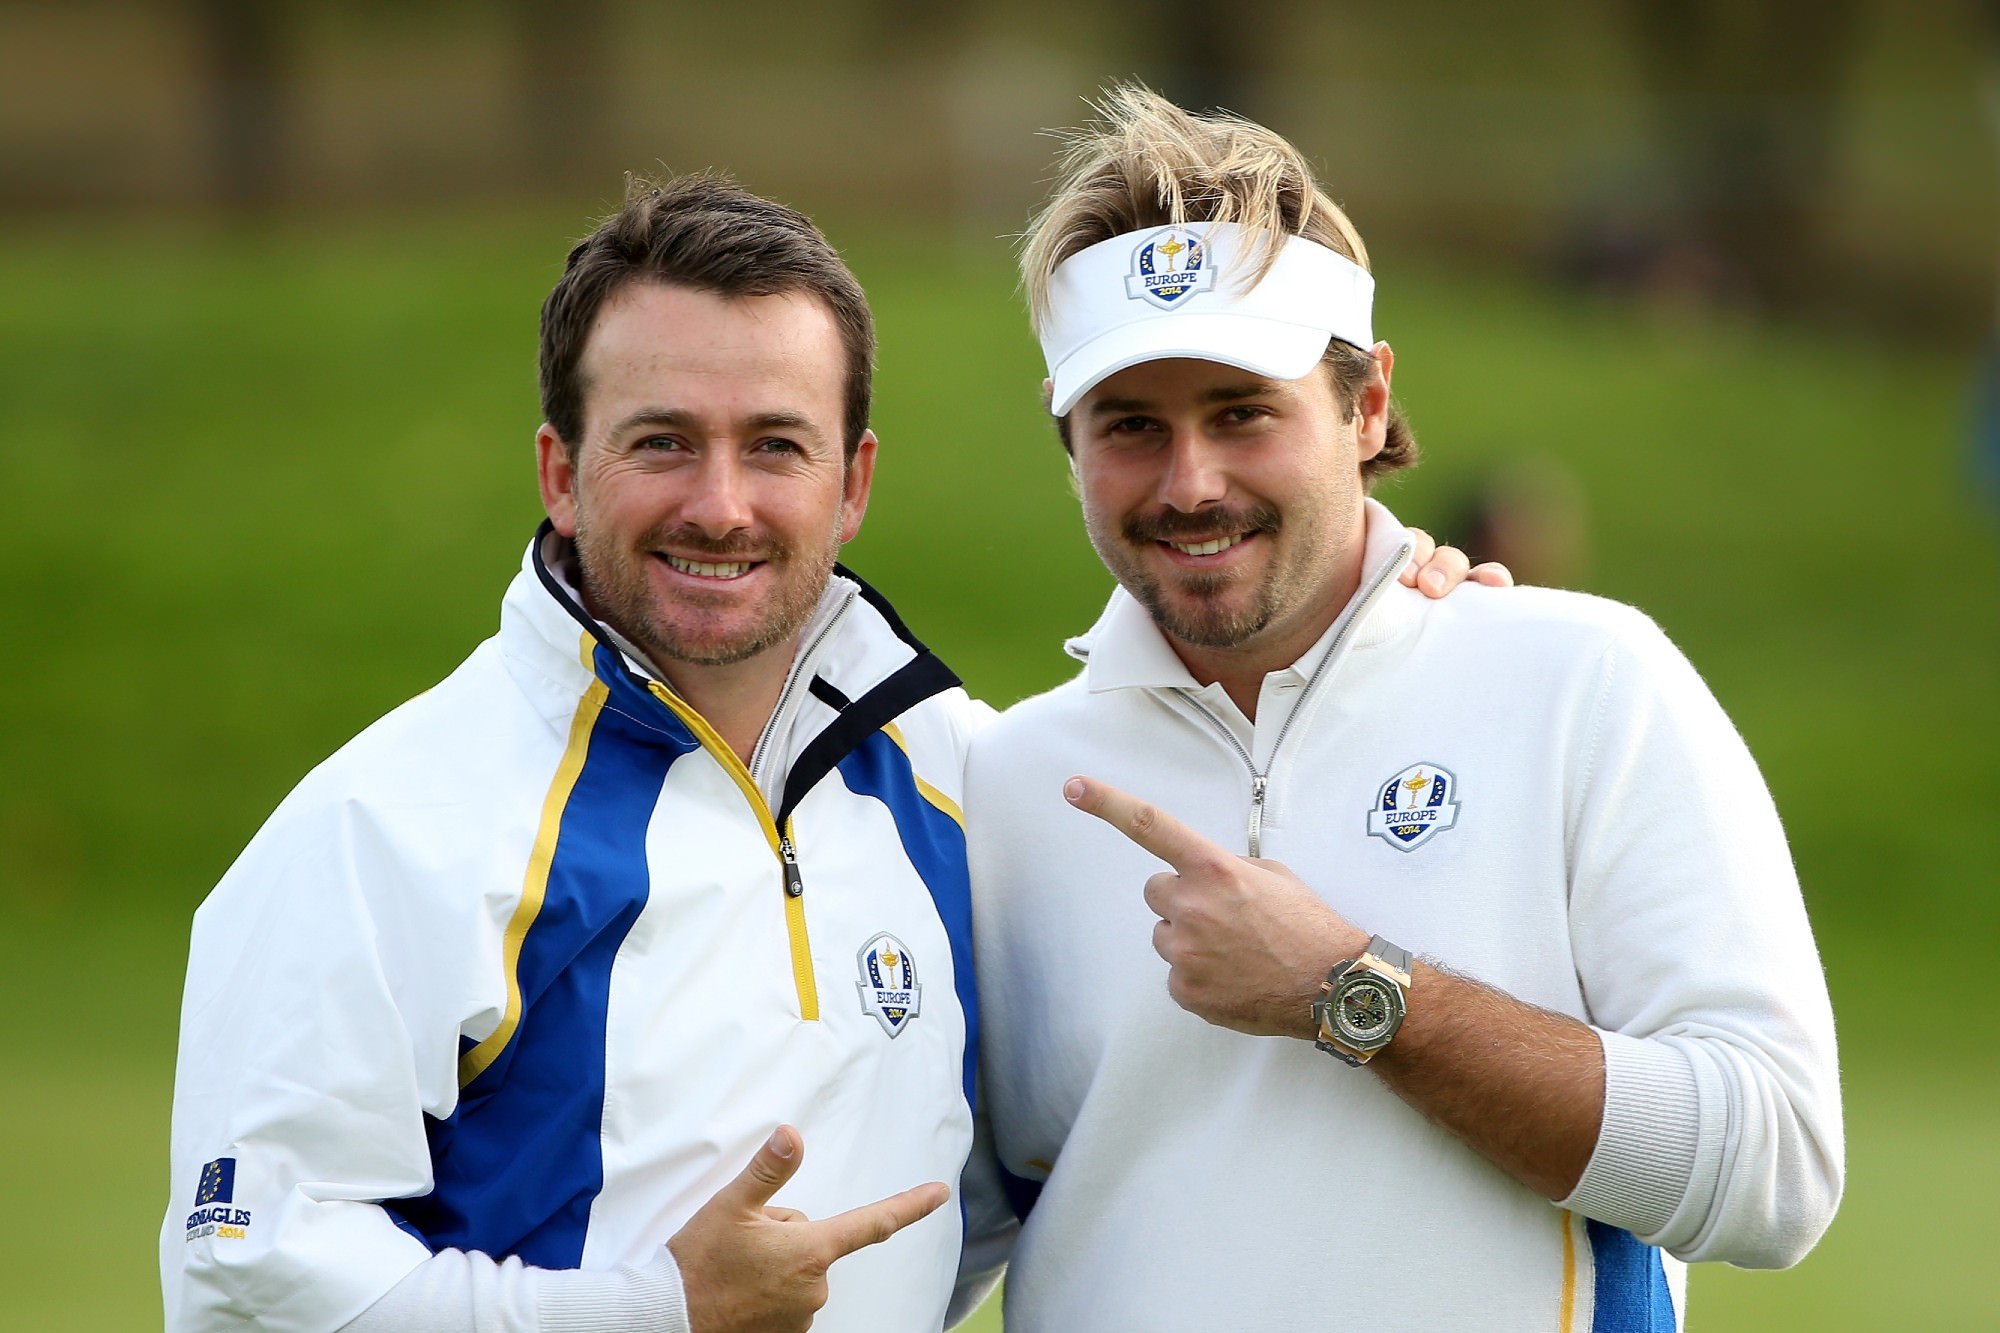 Graeme McDowell and Victor Dubuisson